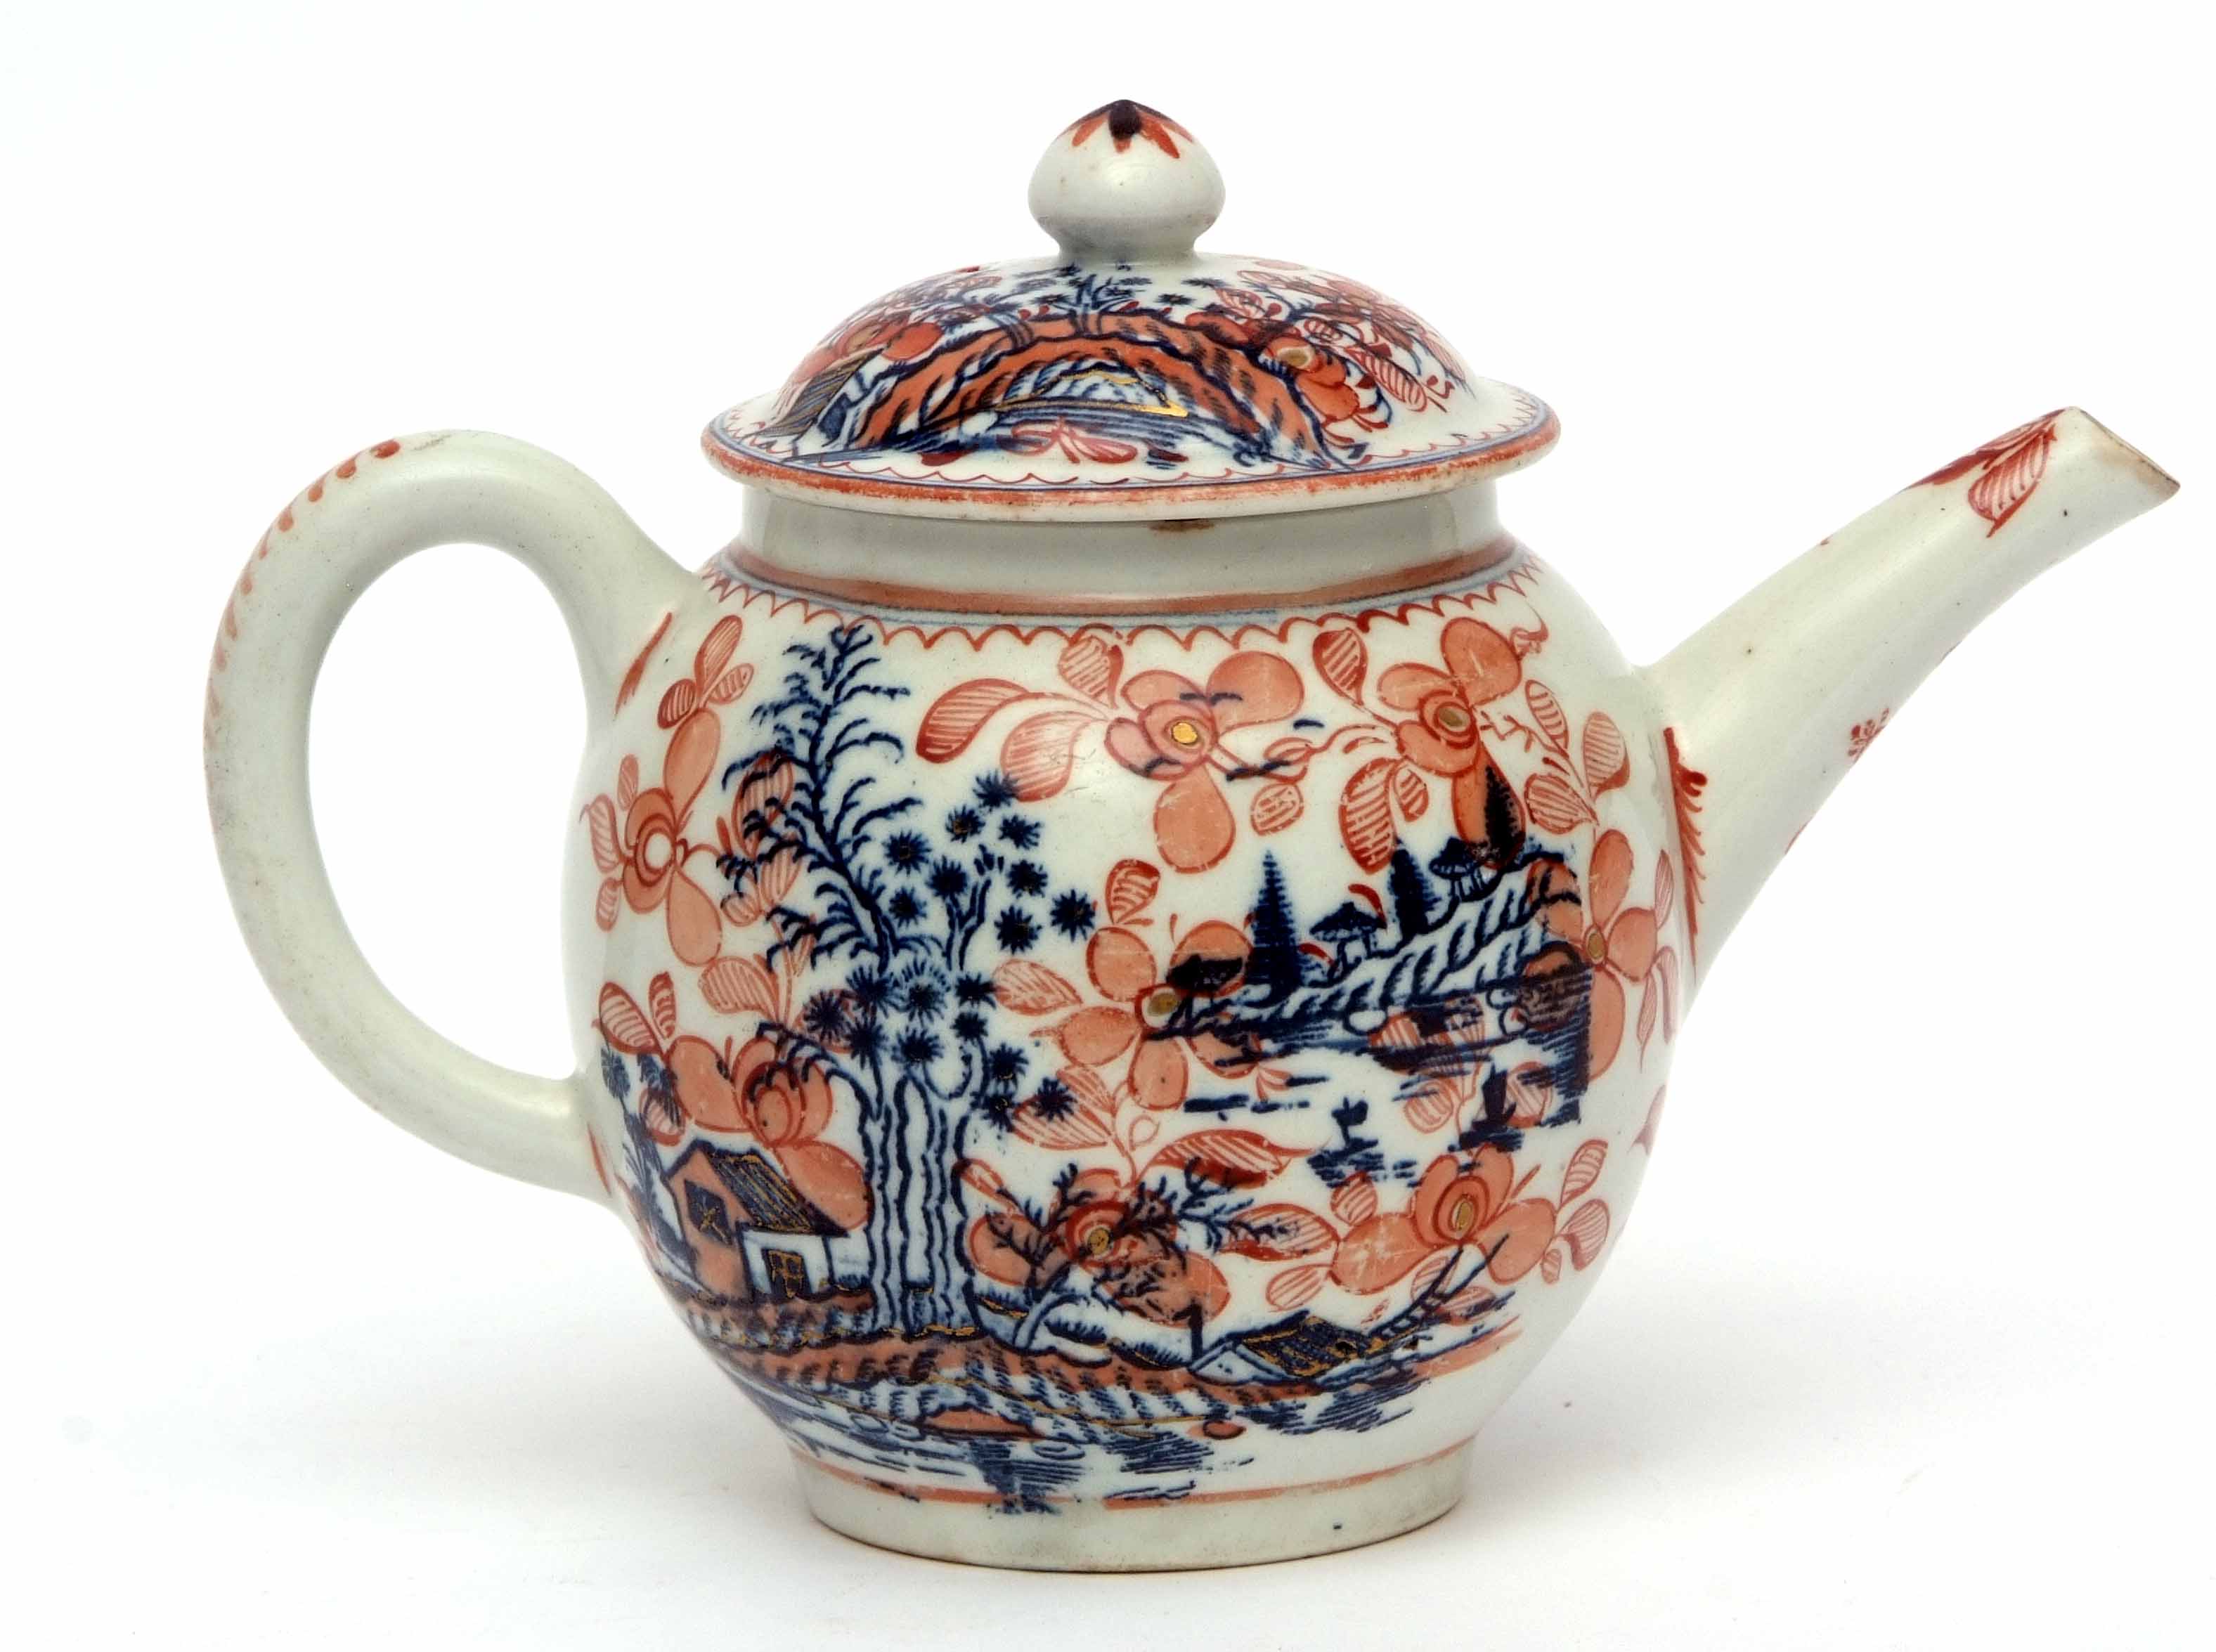 Lowestoft tea pot, circa 1780, of typical form, the blue printed tall trees design further decorated